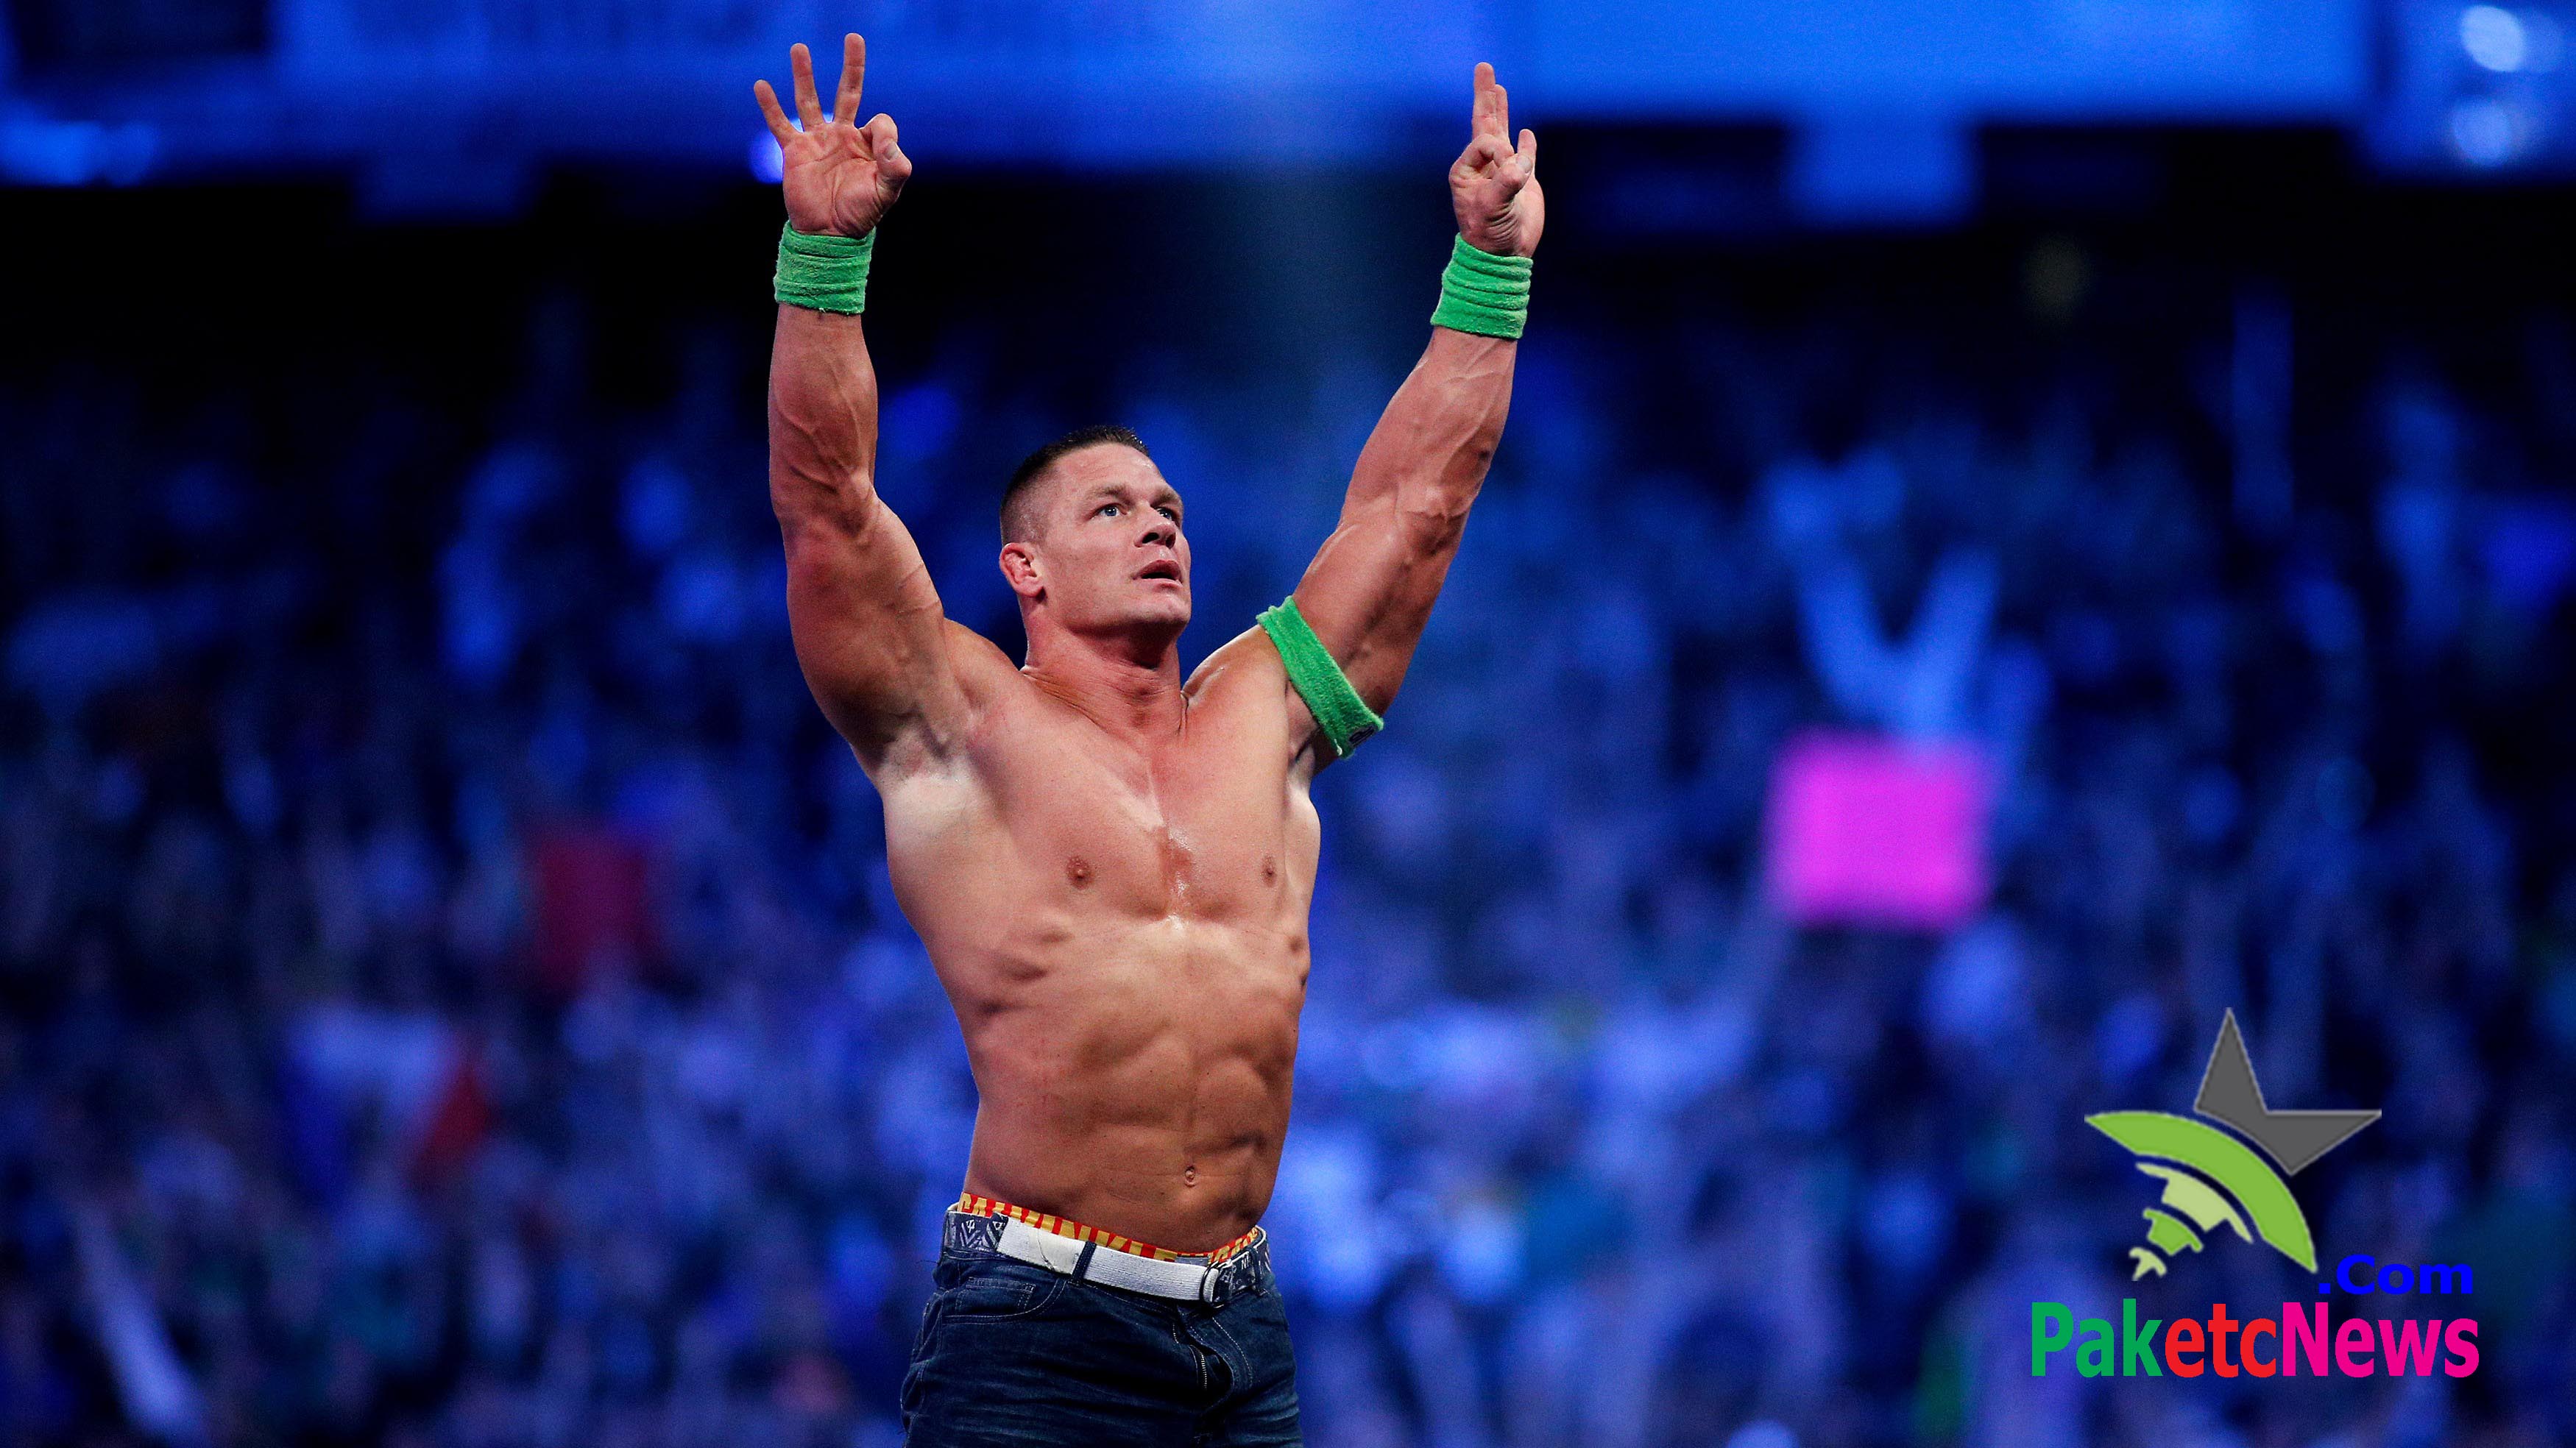 Awesome John Cena Full HD Image Pics Widescreen For Mobile Wallpaper